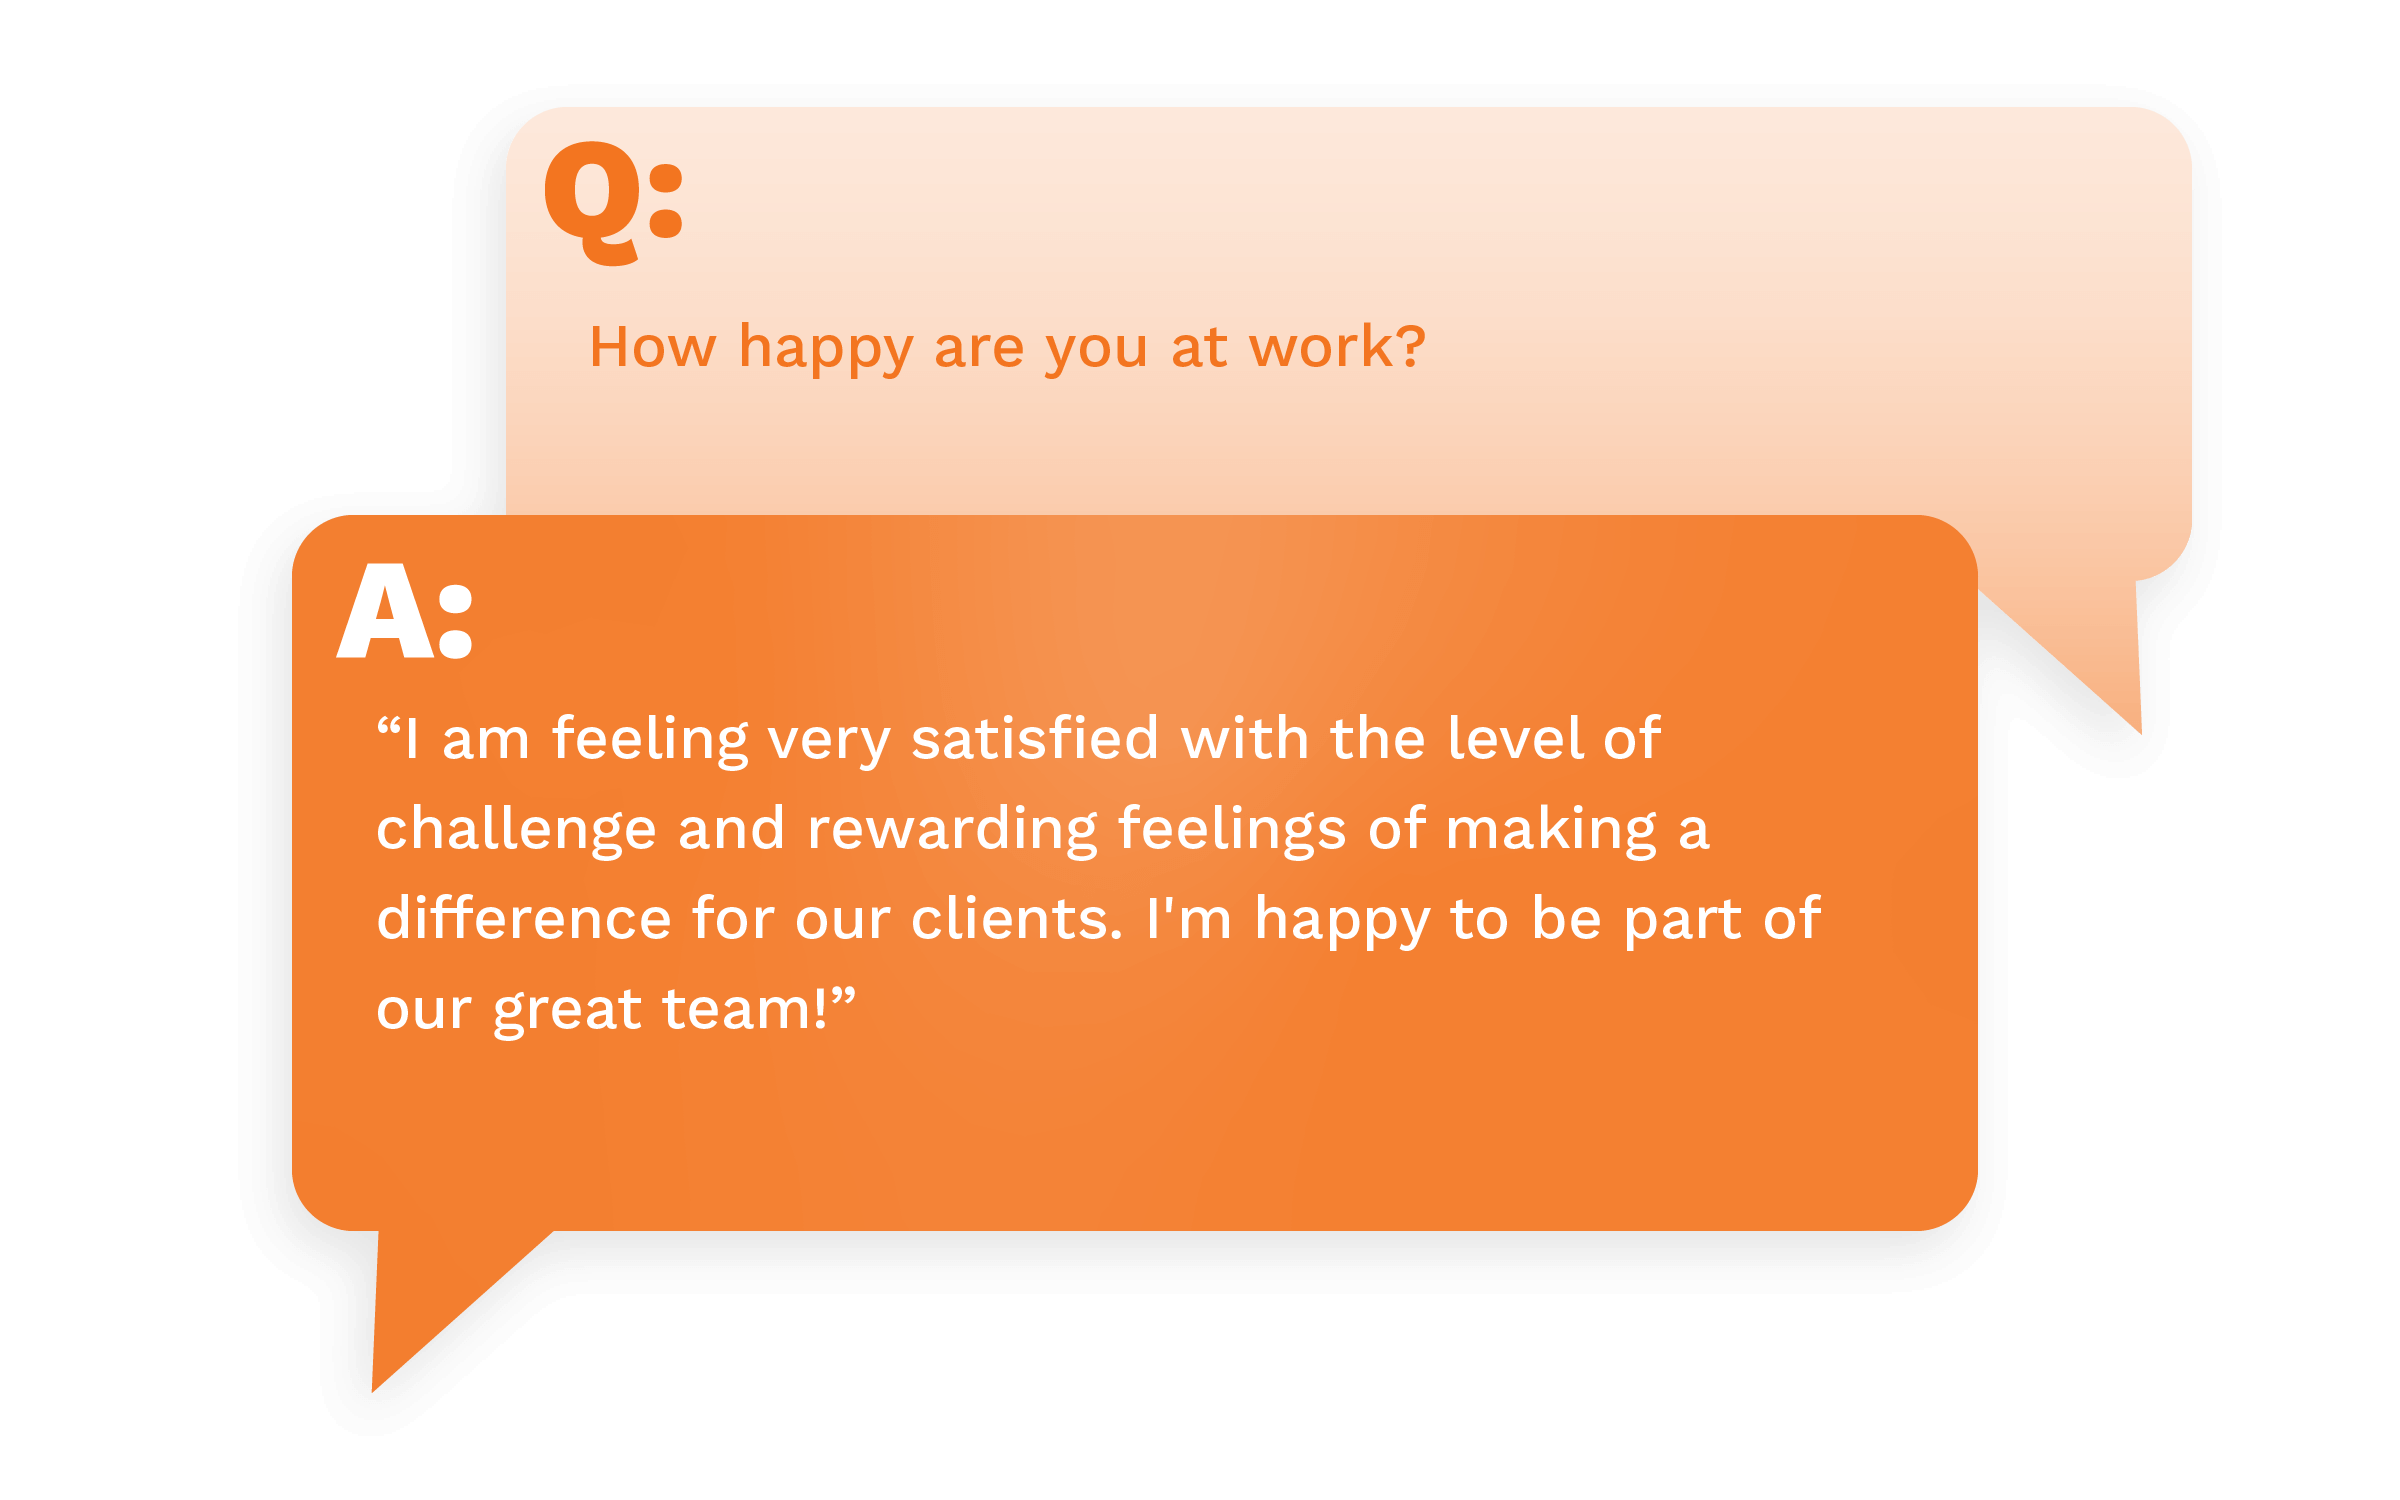 How happy are you at work?